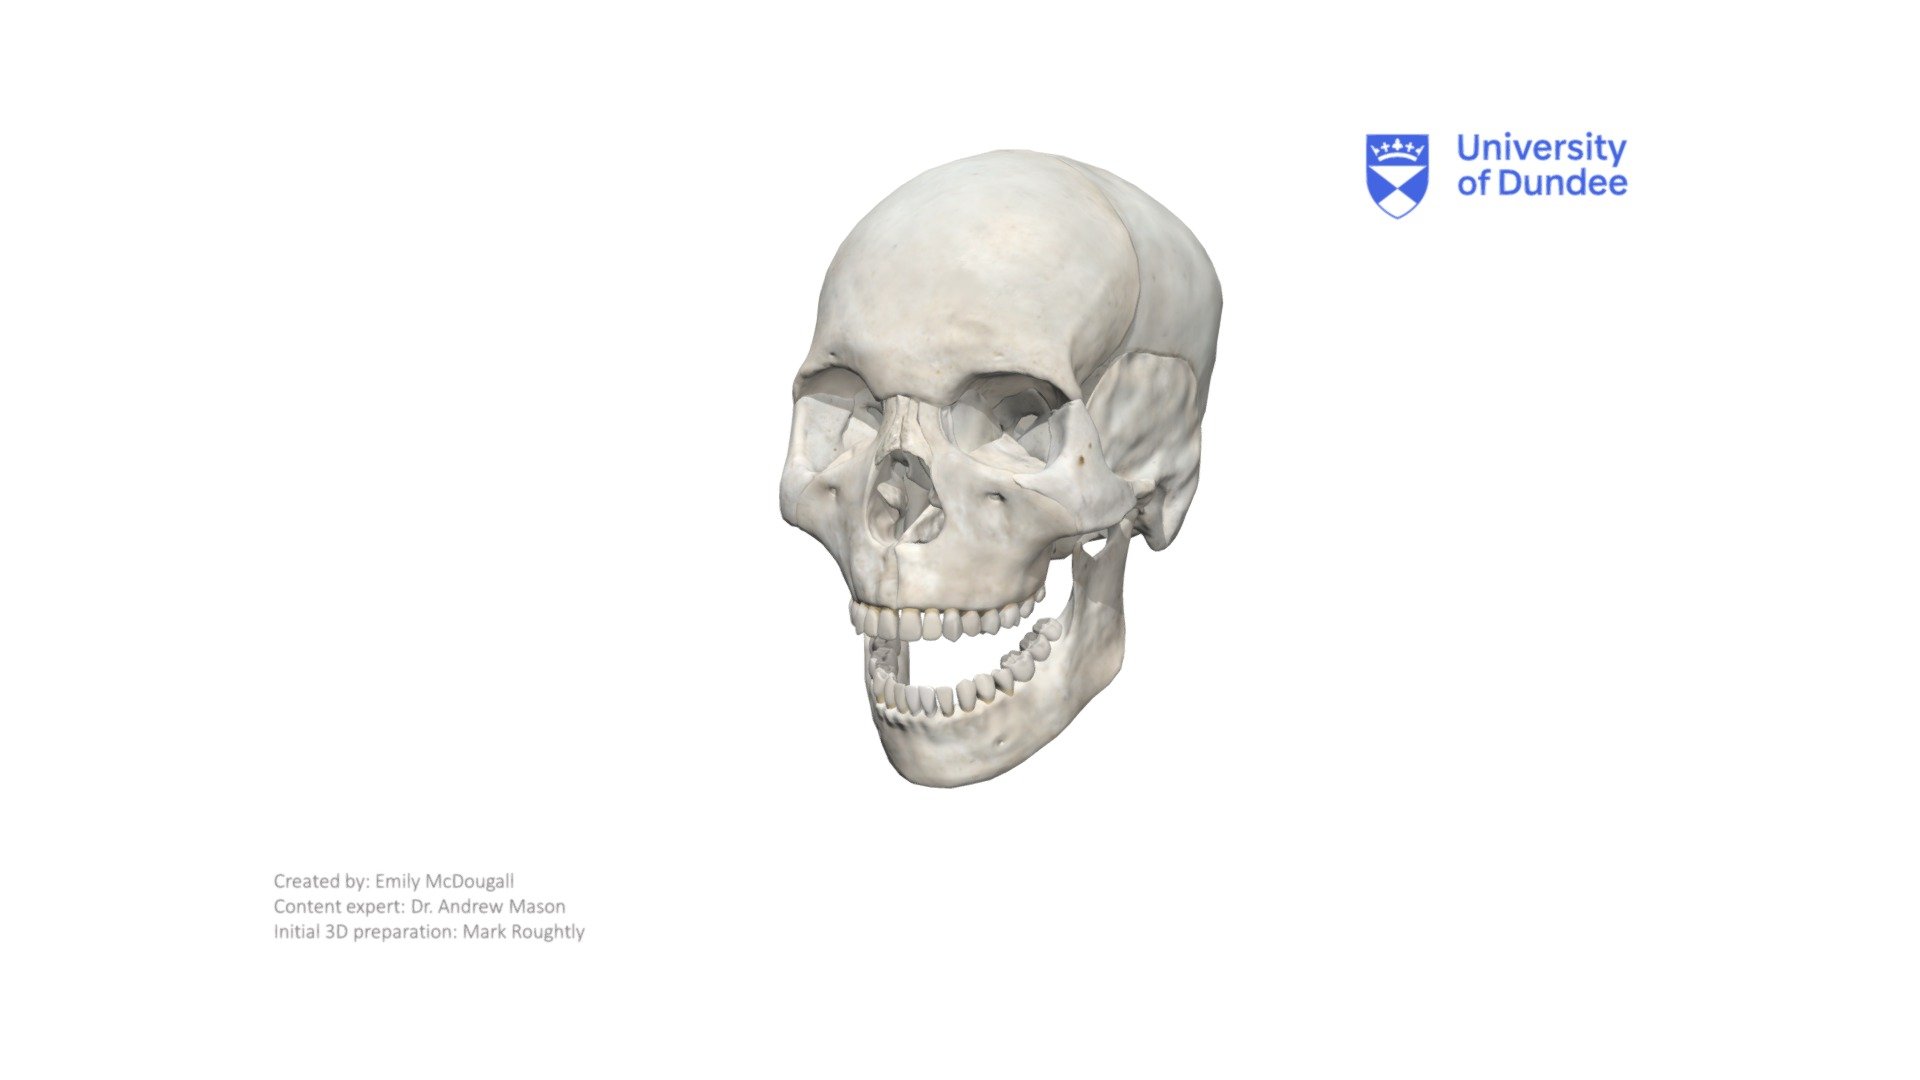 The Articular Disc of the Temporomandibular Joint.

Created by The University of Dundee, School of Dentistry - Articular Disc (TMJ) - Download Free 3D model by University of Dundee, School of Dentistry (@DundeeDental) 3d model